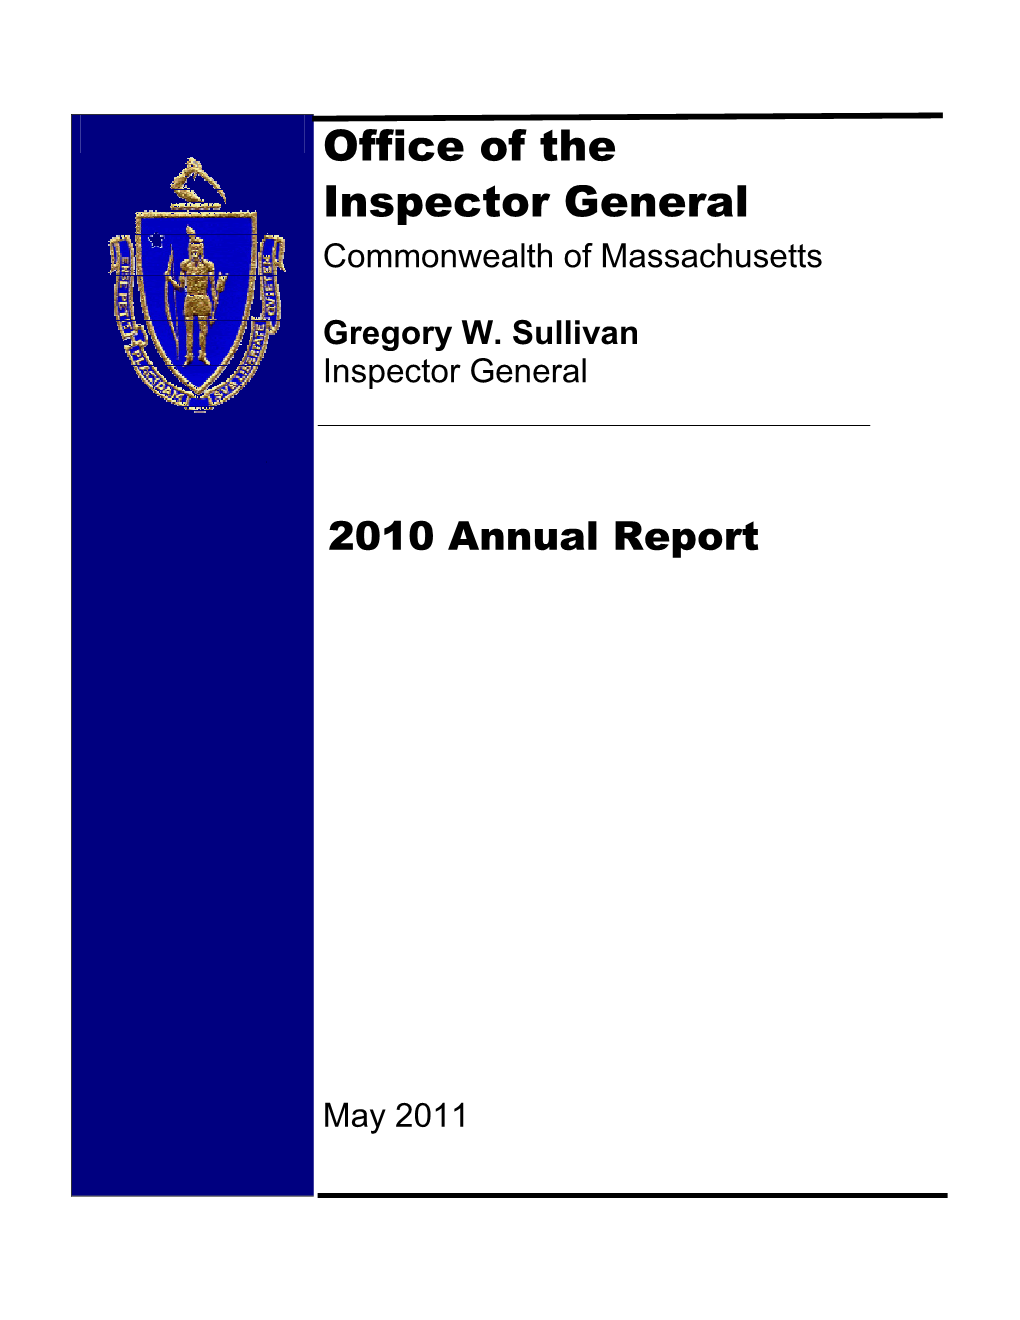 Office of the Inspector General Annual Report 2010